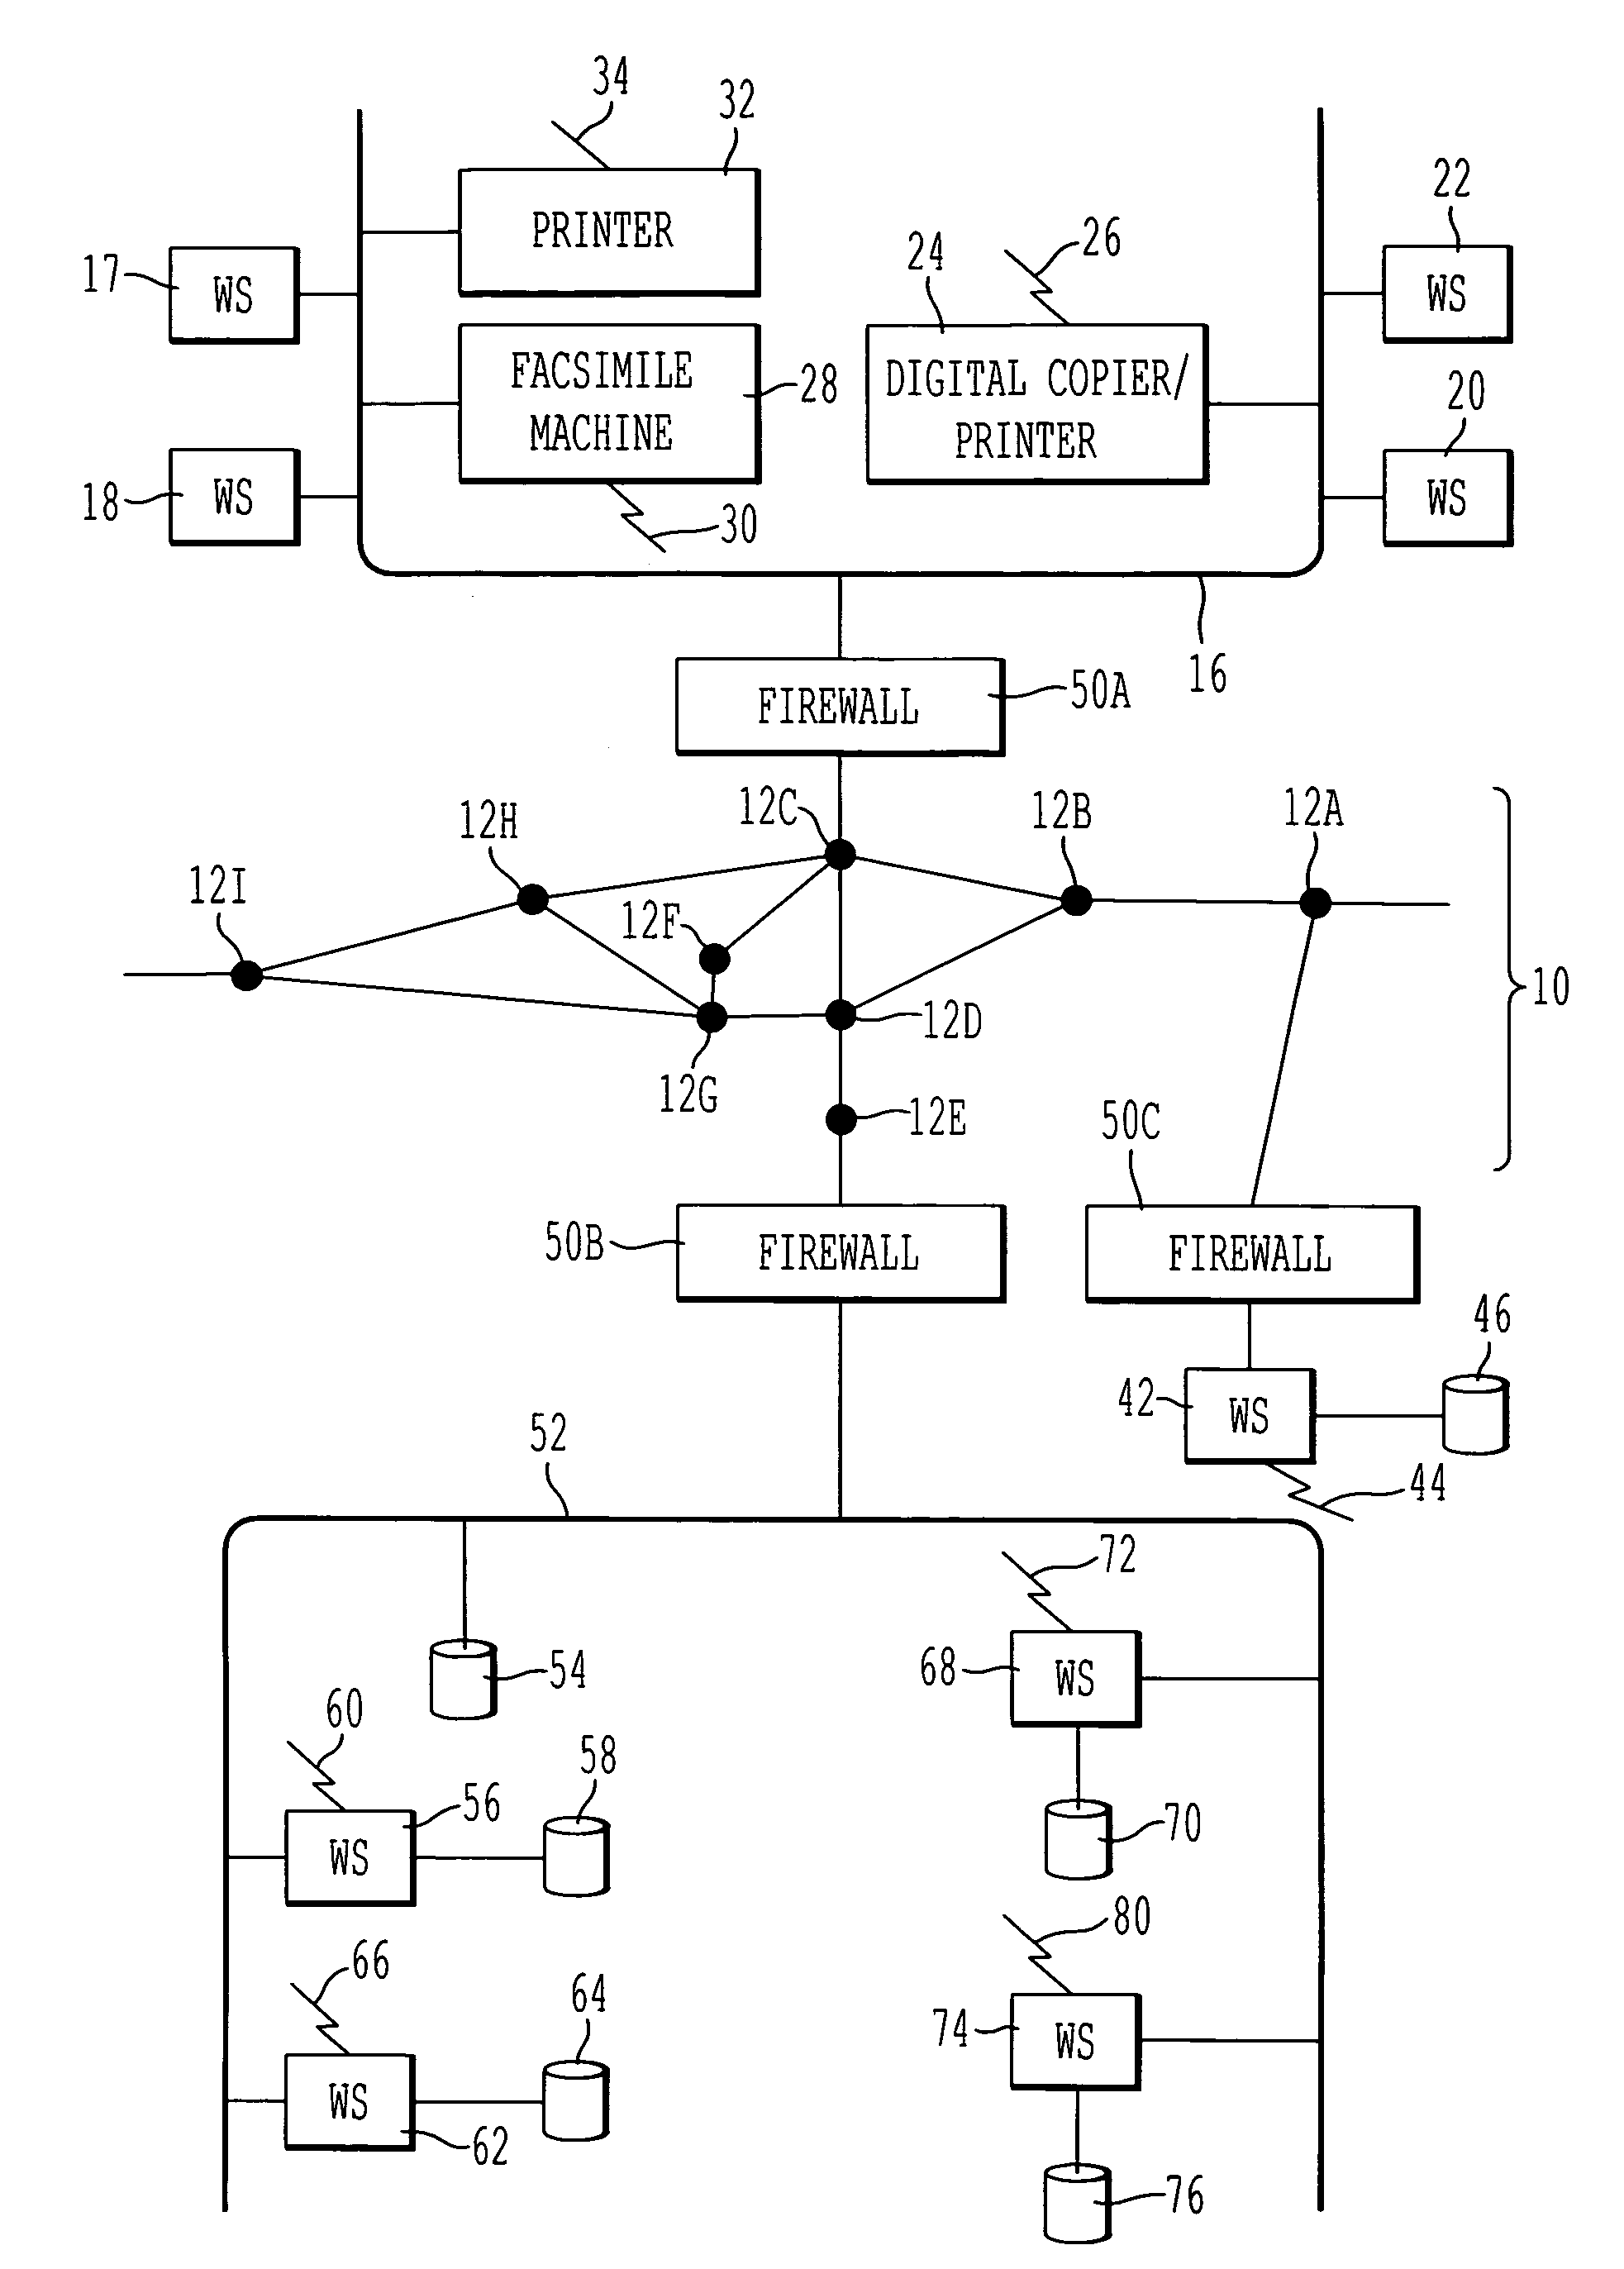 Method and system of remote diagnostic, control and information collection using a dynamic linked library of multiple formats and multiple protocols with intelligent formatter